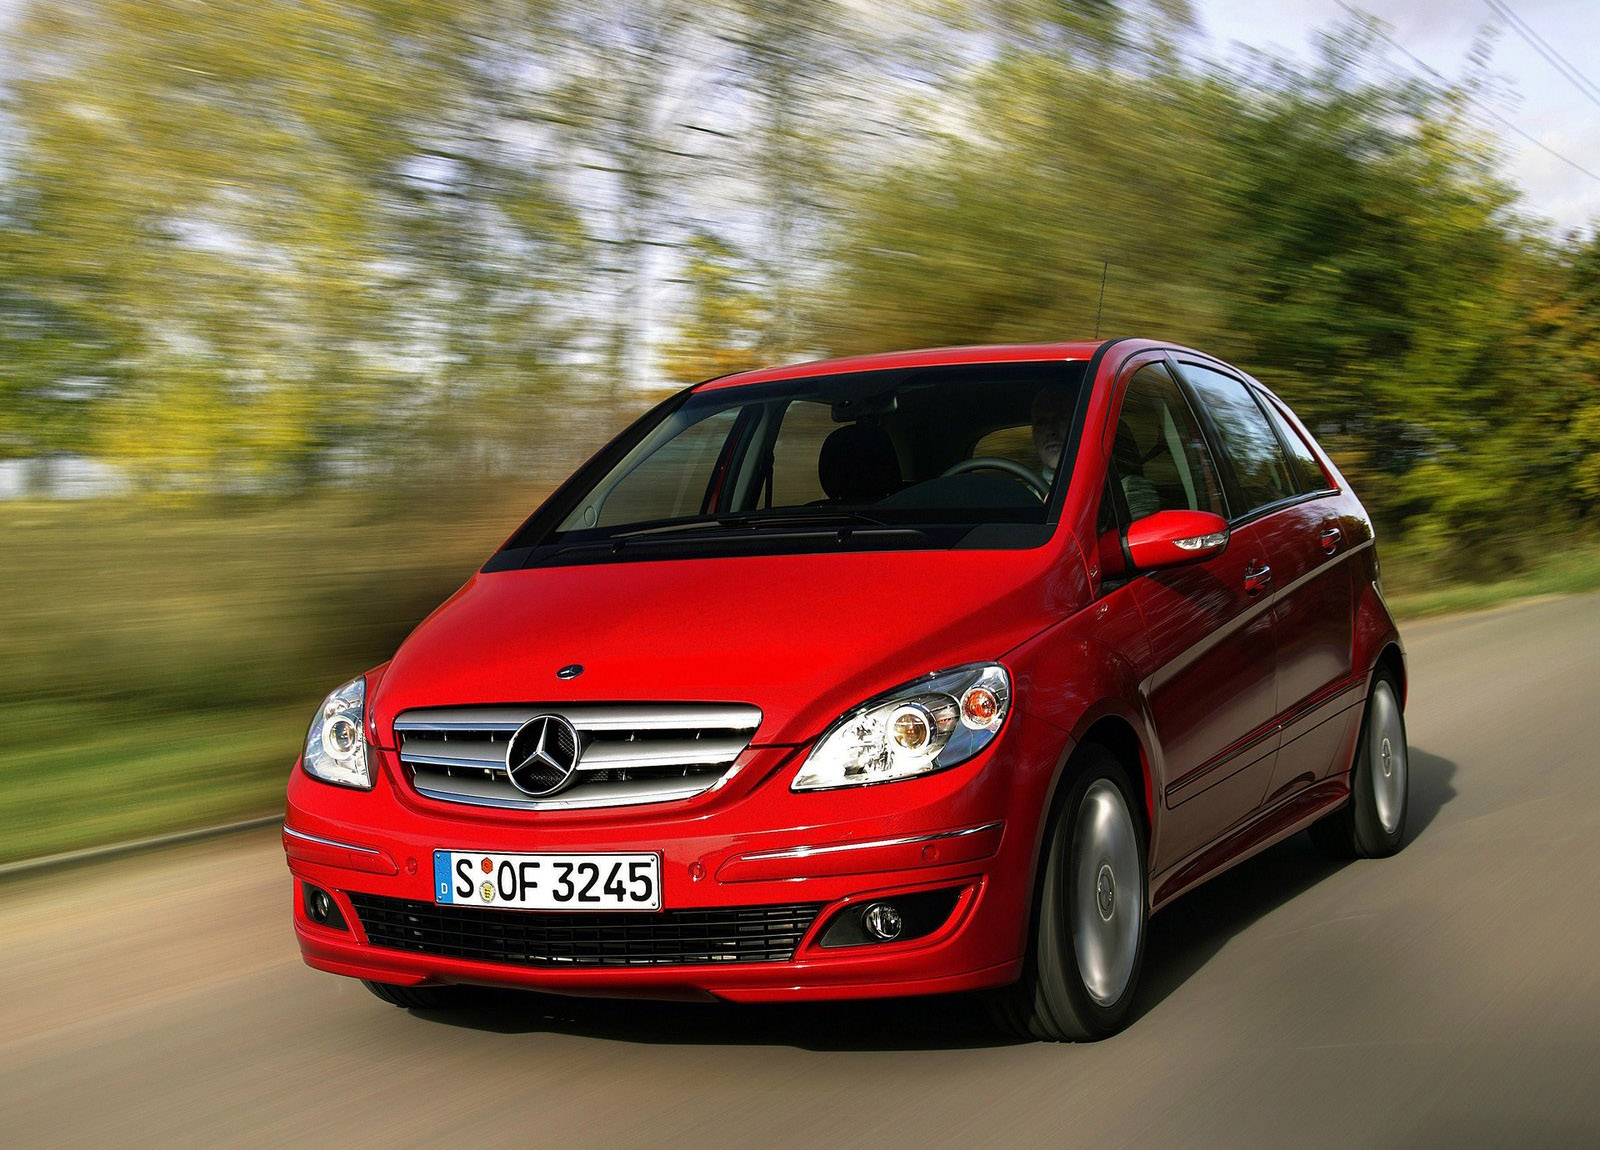 2006 Mercedes-Benz B200 TURBO - Discovery4 - Shannons Club